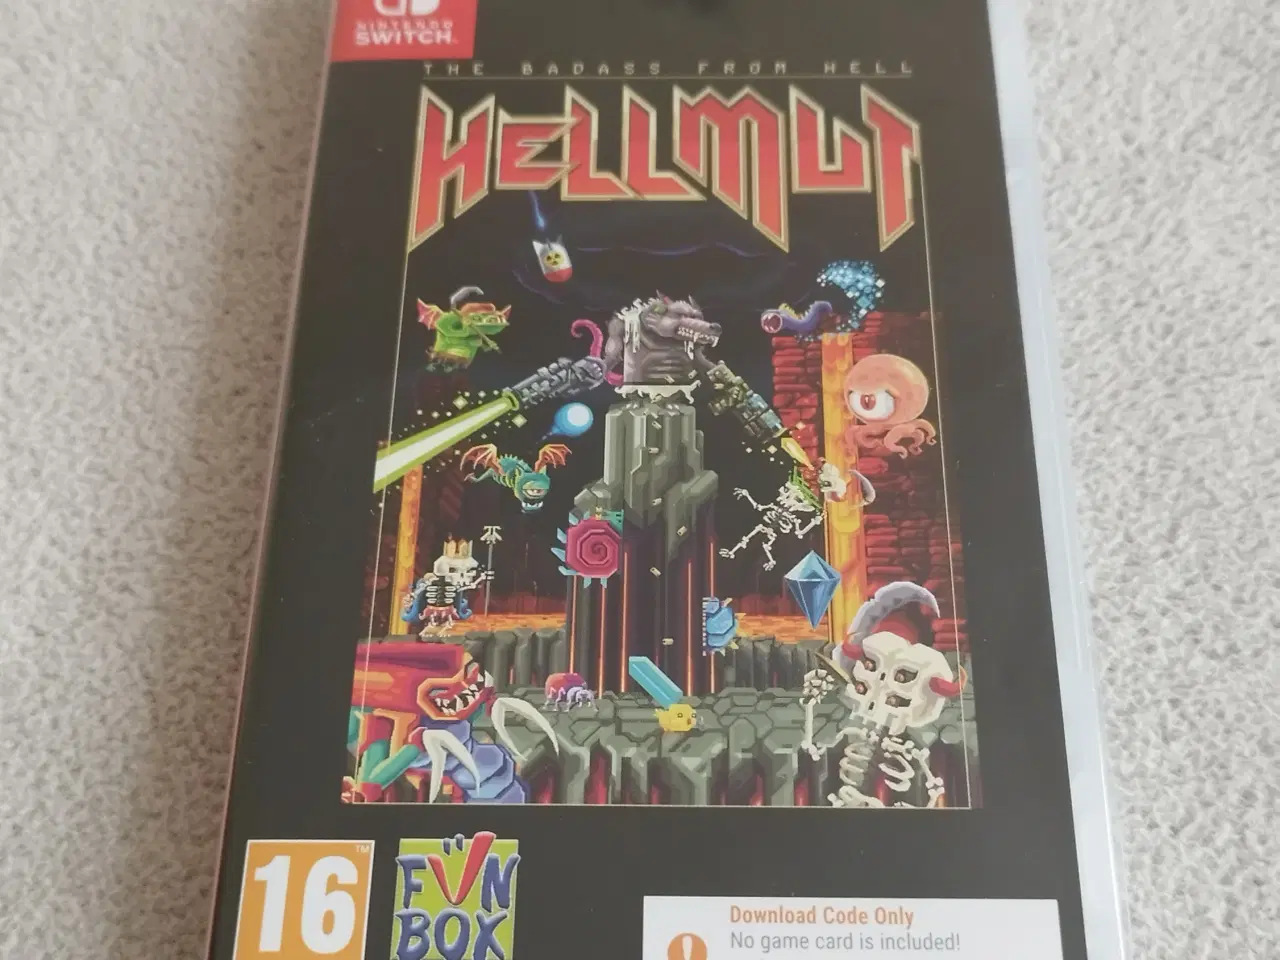 Billede 1 - Hellmut The Badass from Hell - Switch spil